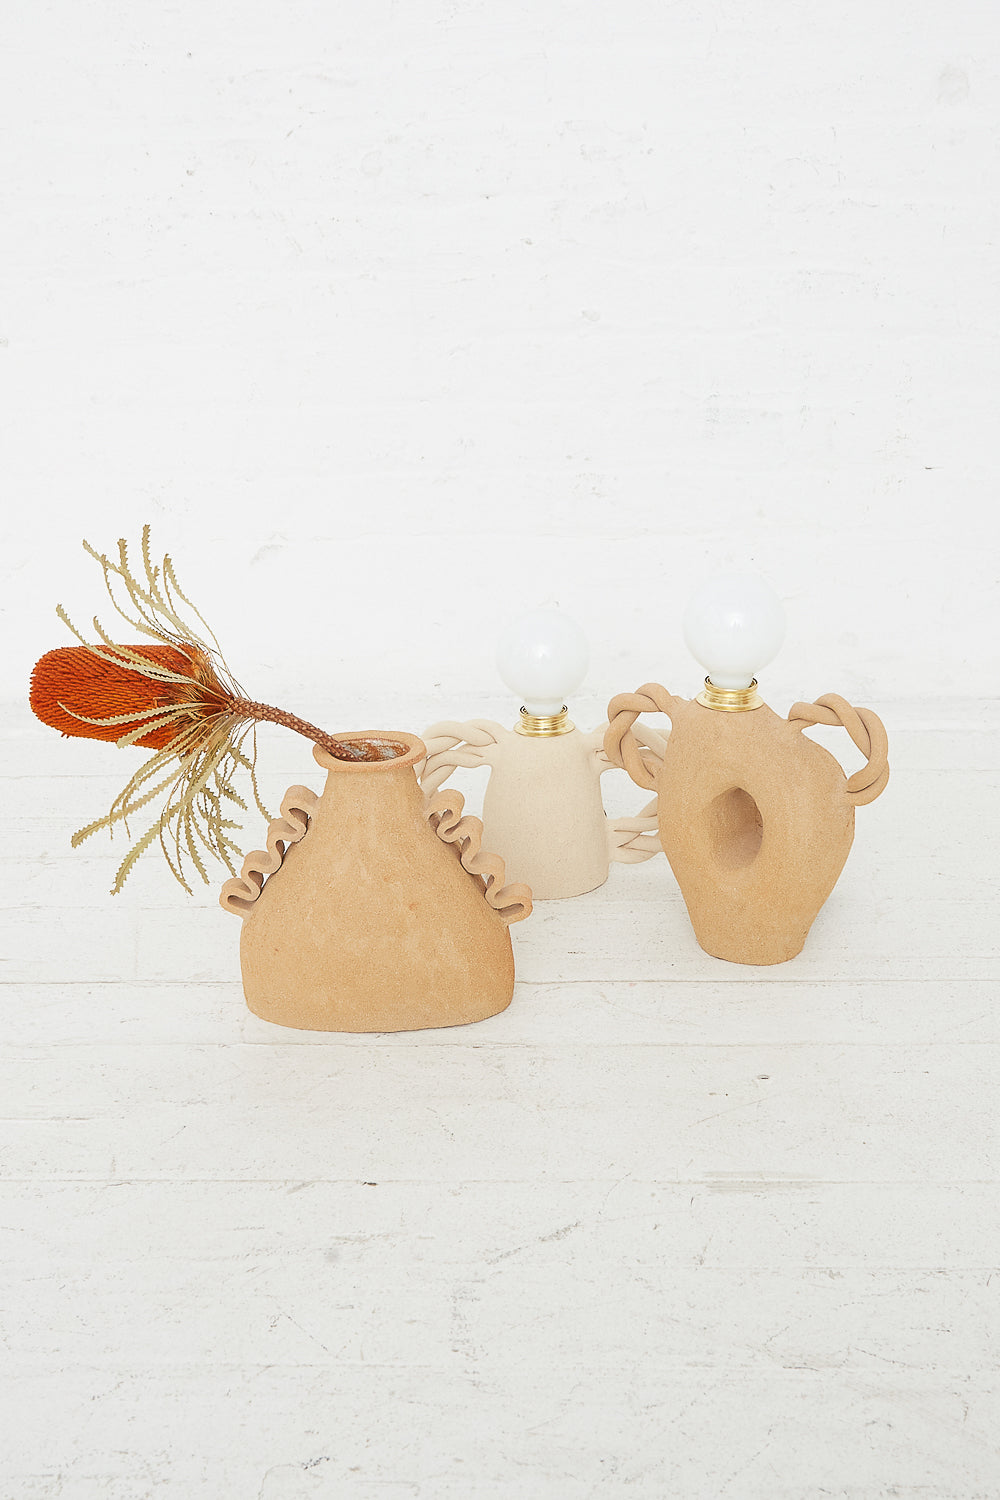 Three decorative Amphora Soleil vases with spherical accents and handles, one holding dried flowers, on a white background. The vases are from Clandestine.